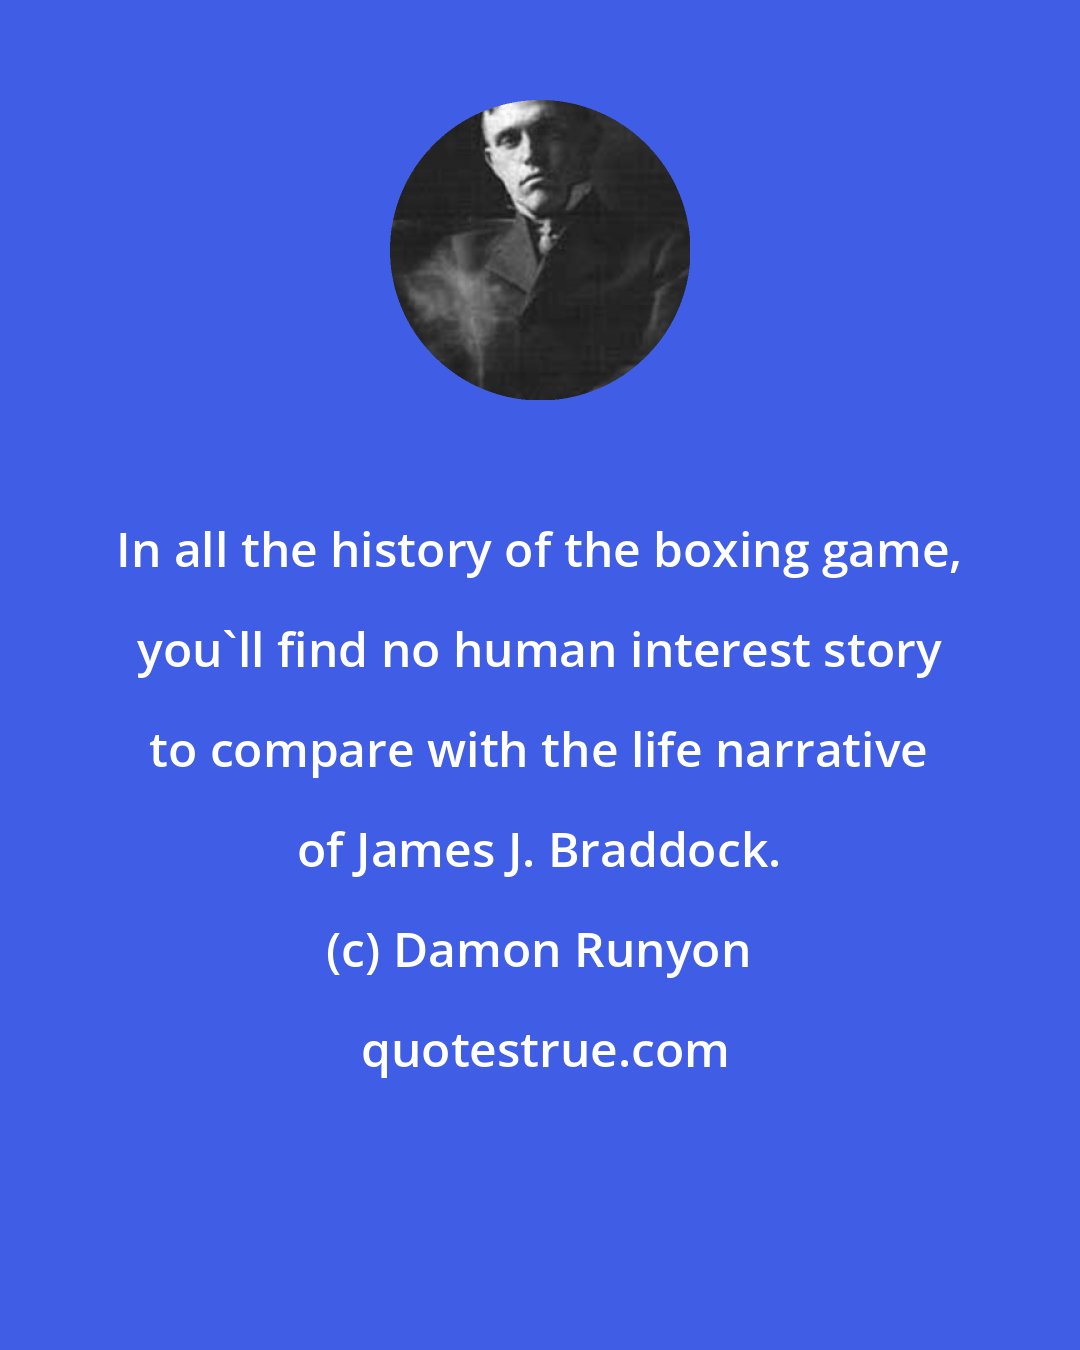 Damon Runyon: In all the history of the boxing game, you'll find no human interest story to compare with the life narrative of James J. Braddock.